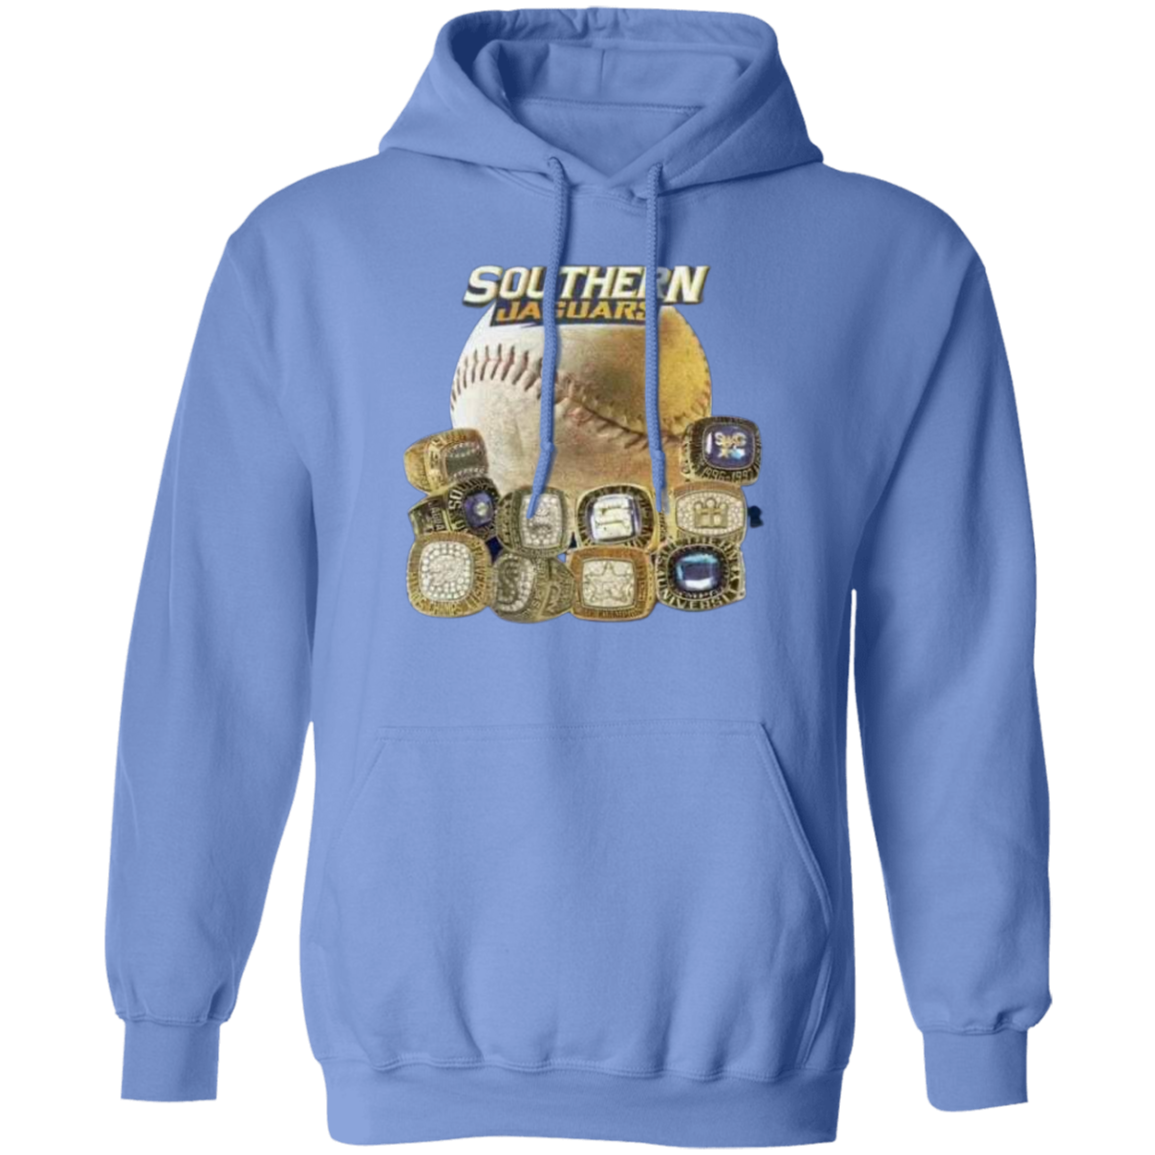 SU Baseball SWAC (Southern Wins Another Championship)  Rings G185 Pullover Hoodie